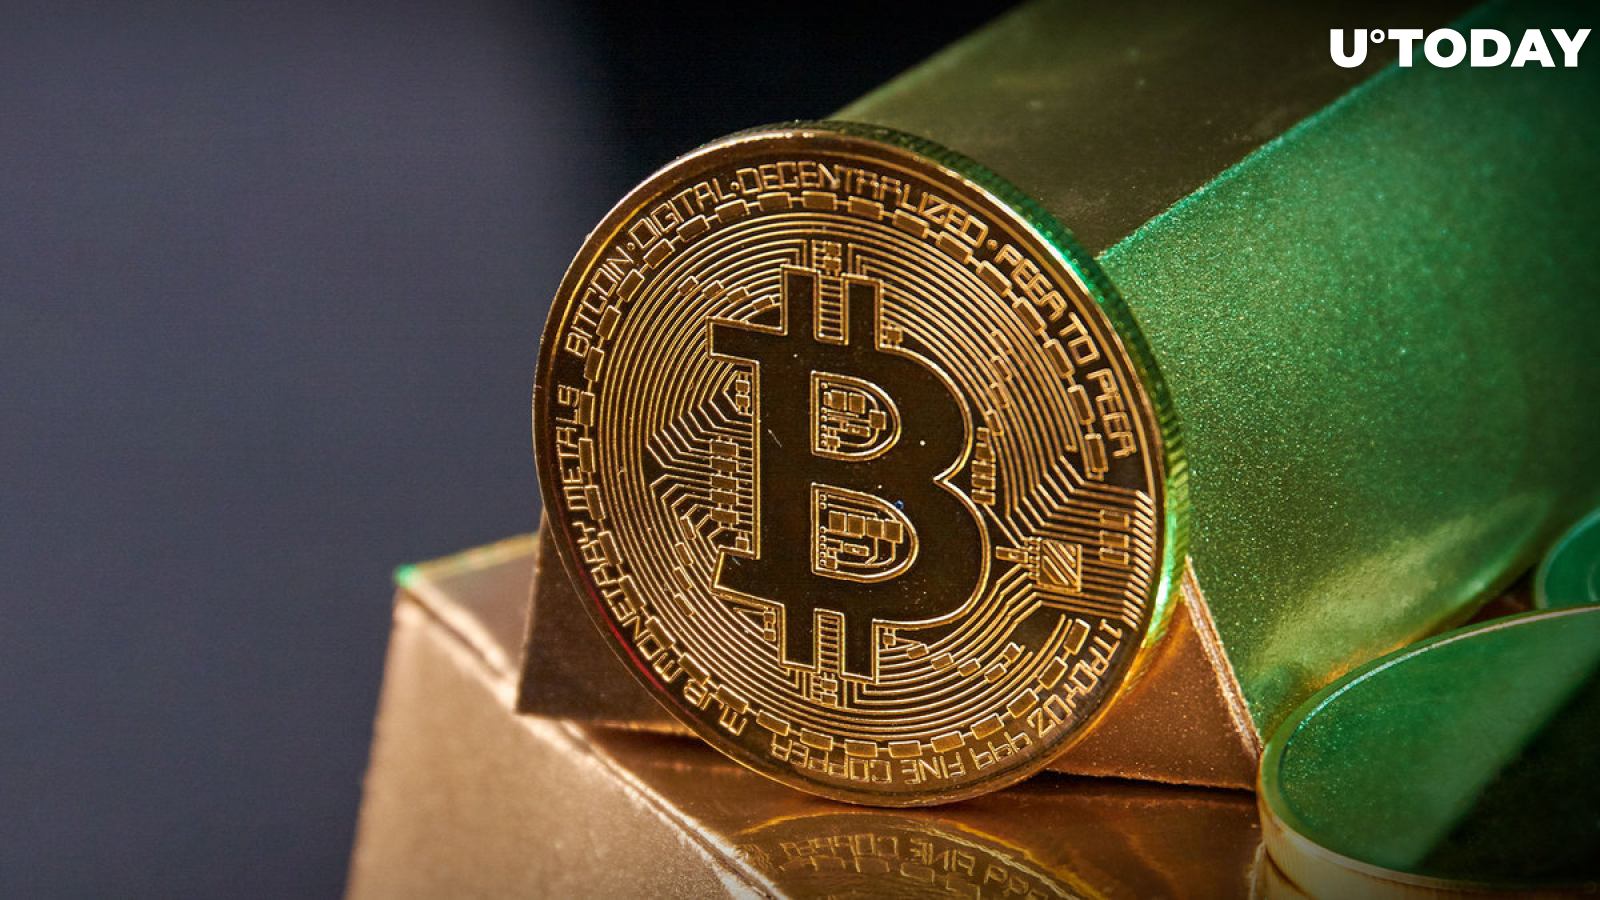 Bitcoin Price to $650,000: Analyst Sees BTC Outperforming Gold in Long Term